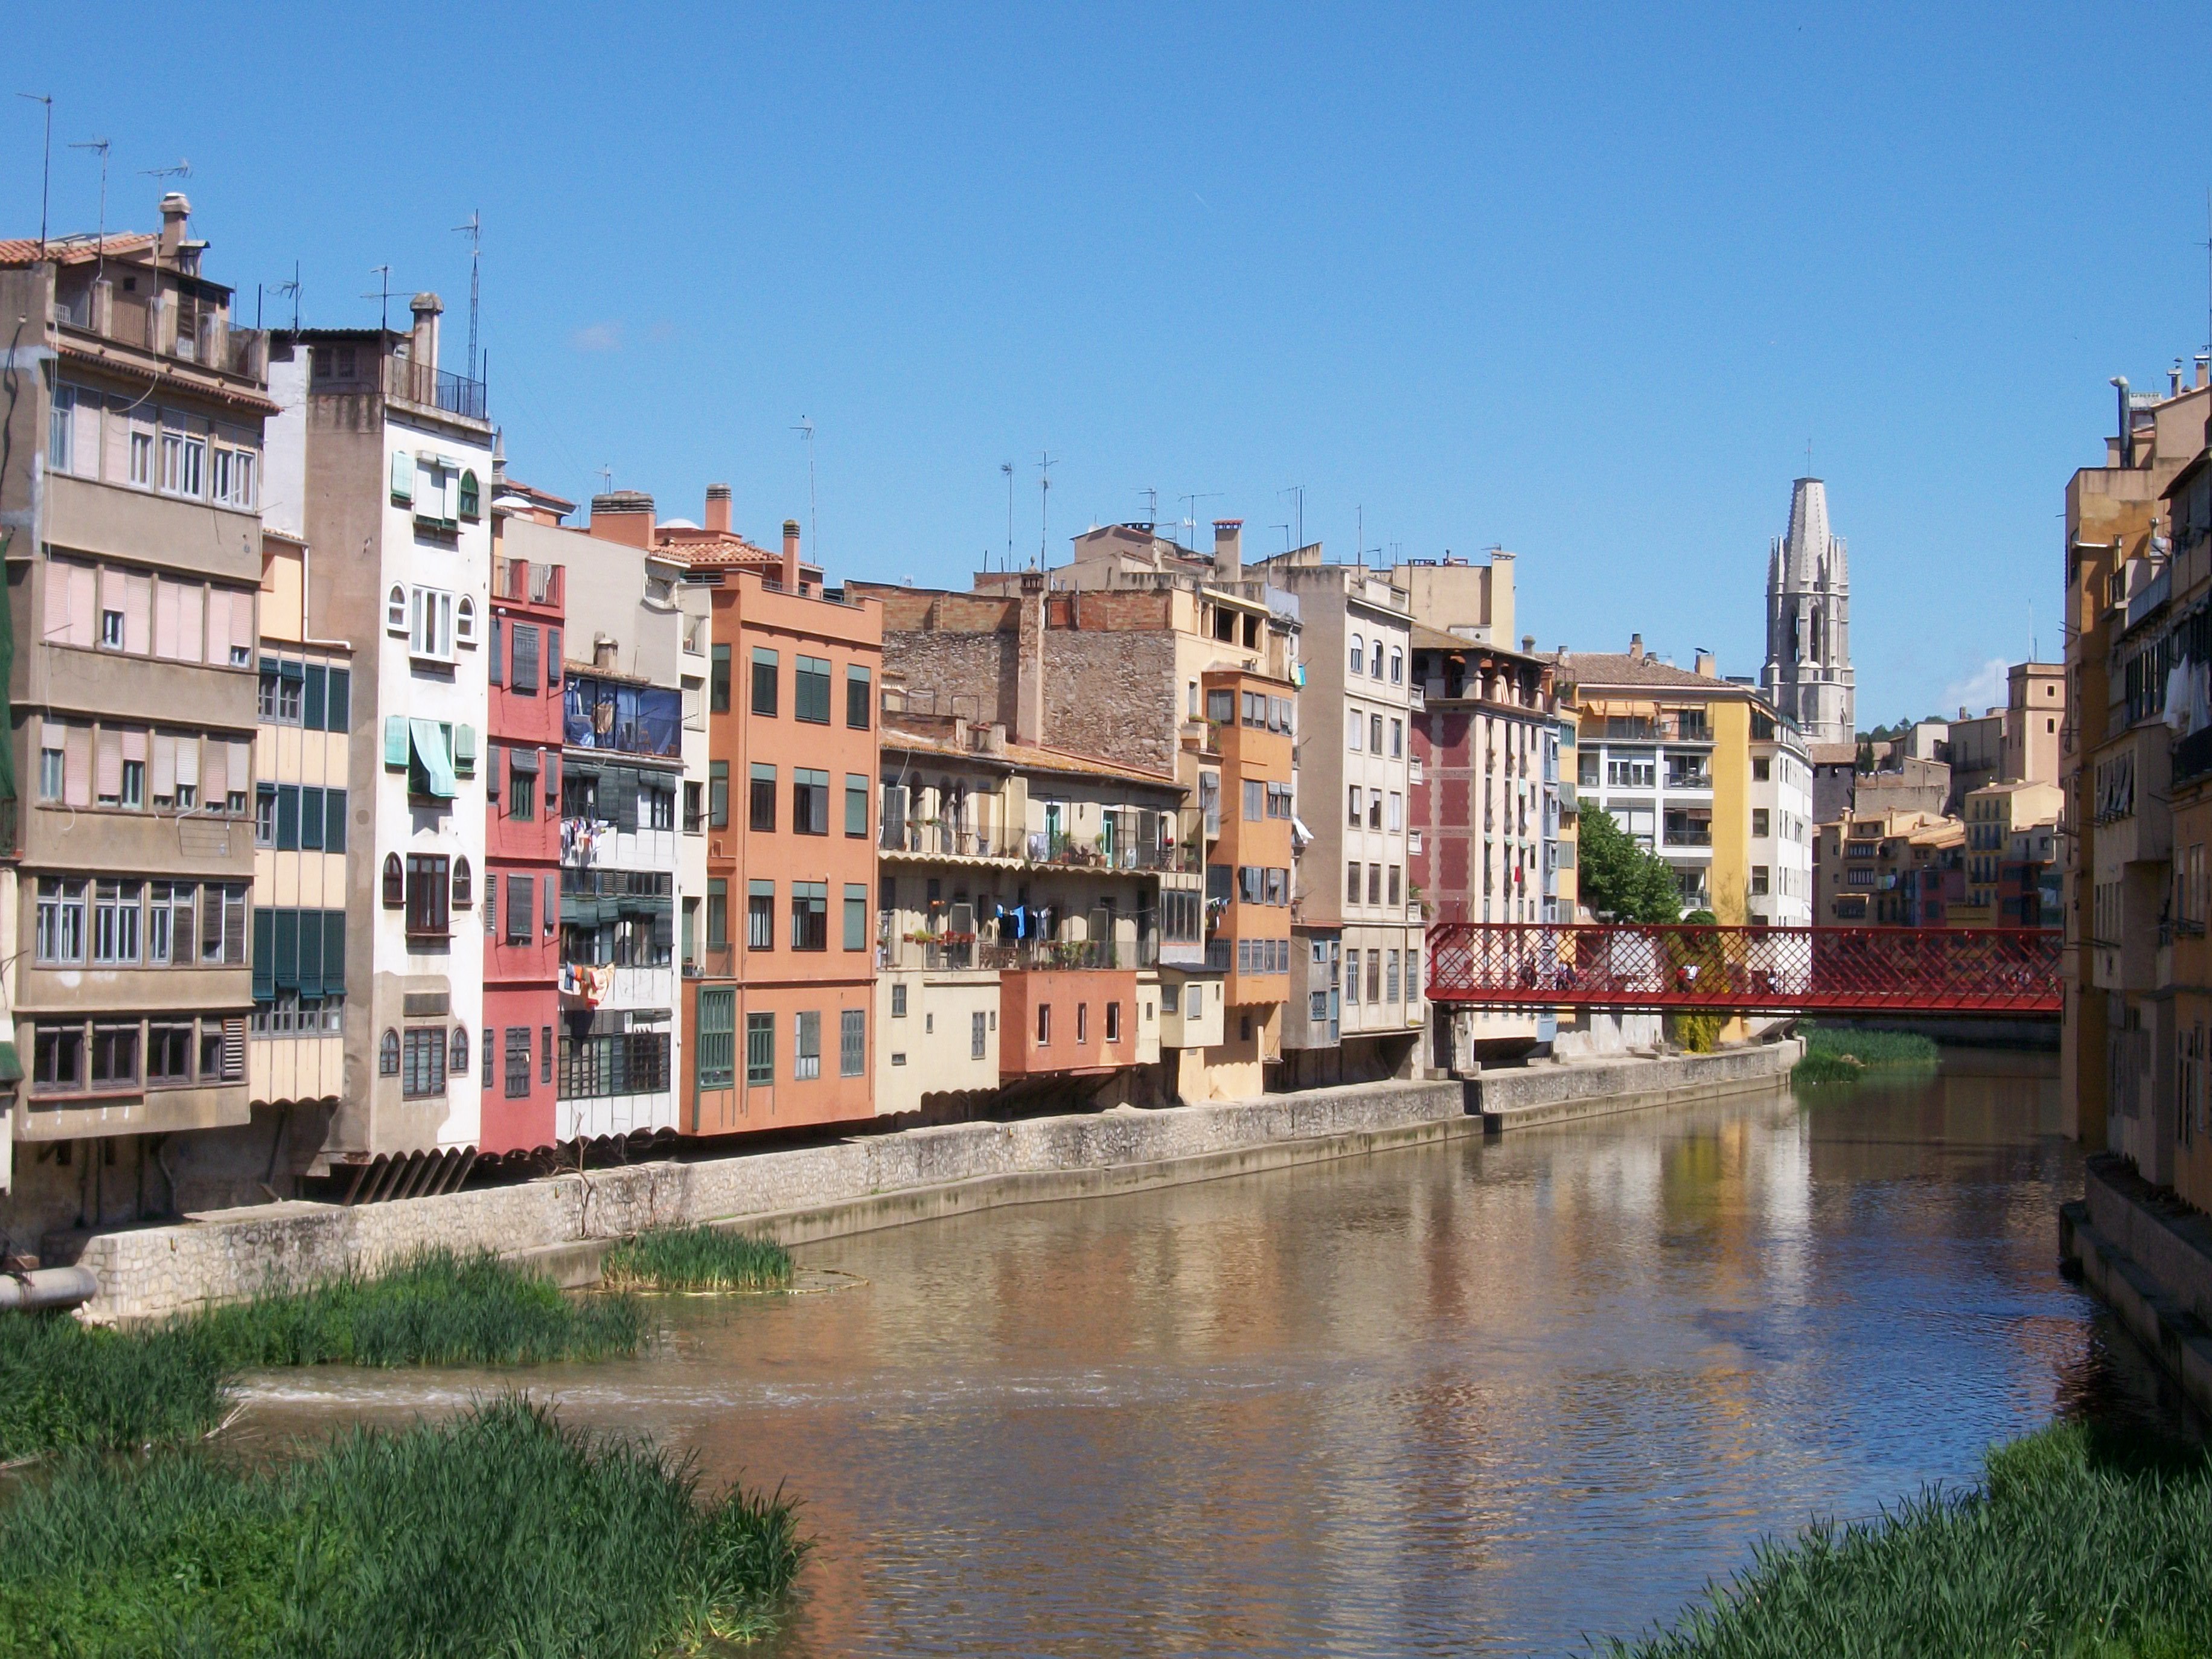 Pont Eiffel and river Onyar in Girona, Catalonia, Spain